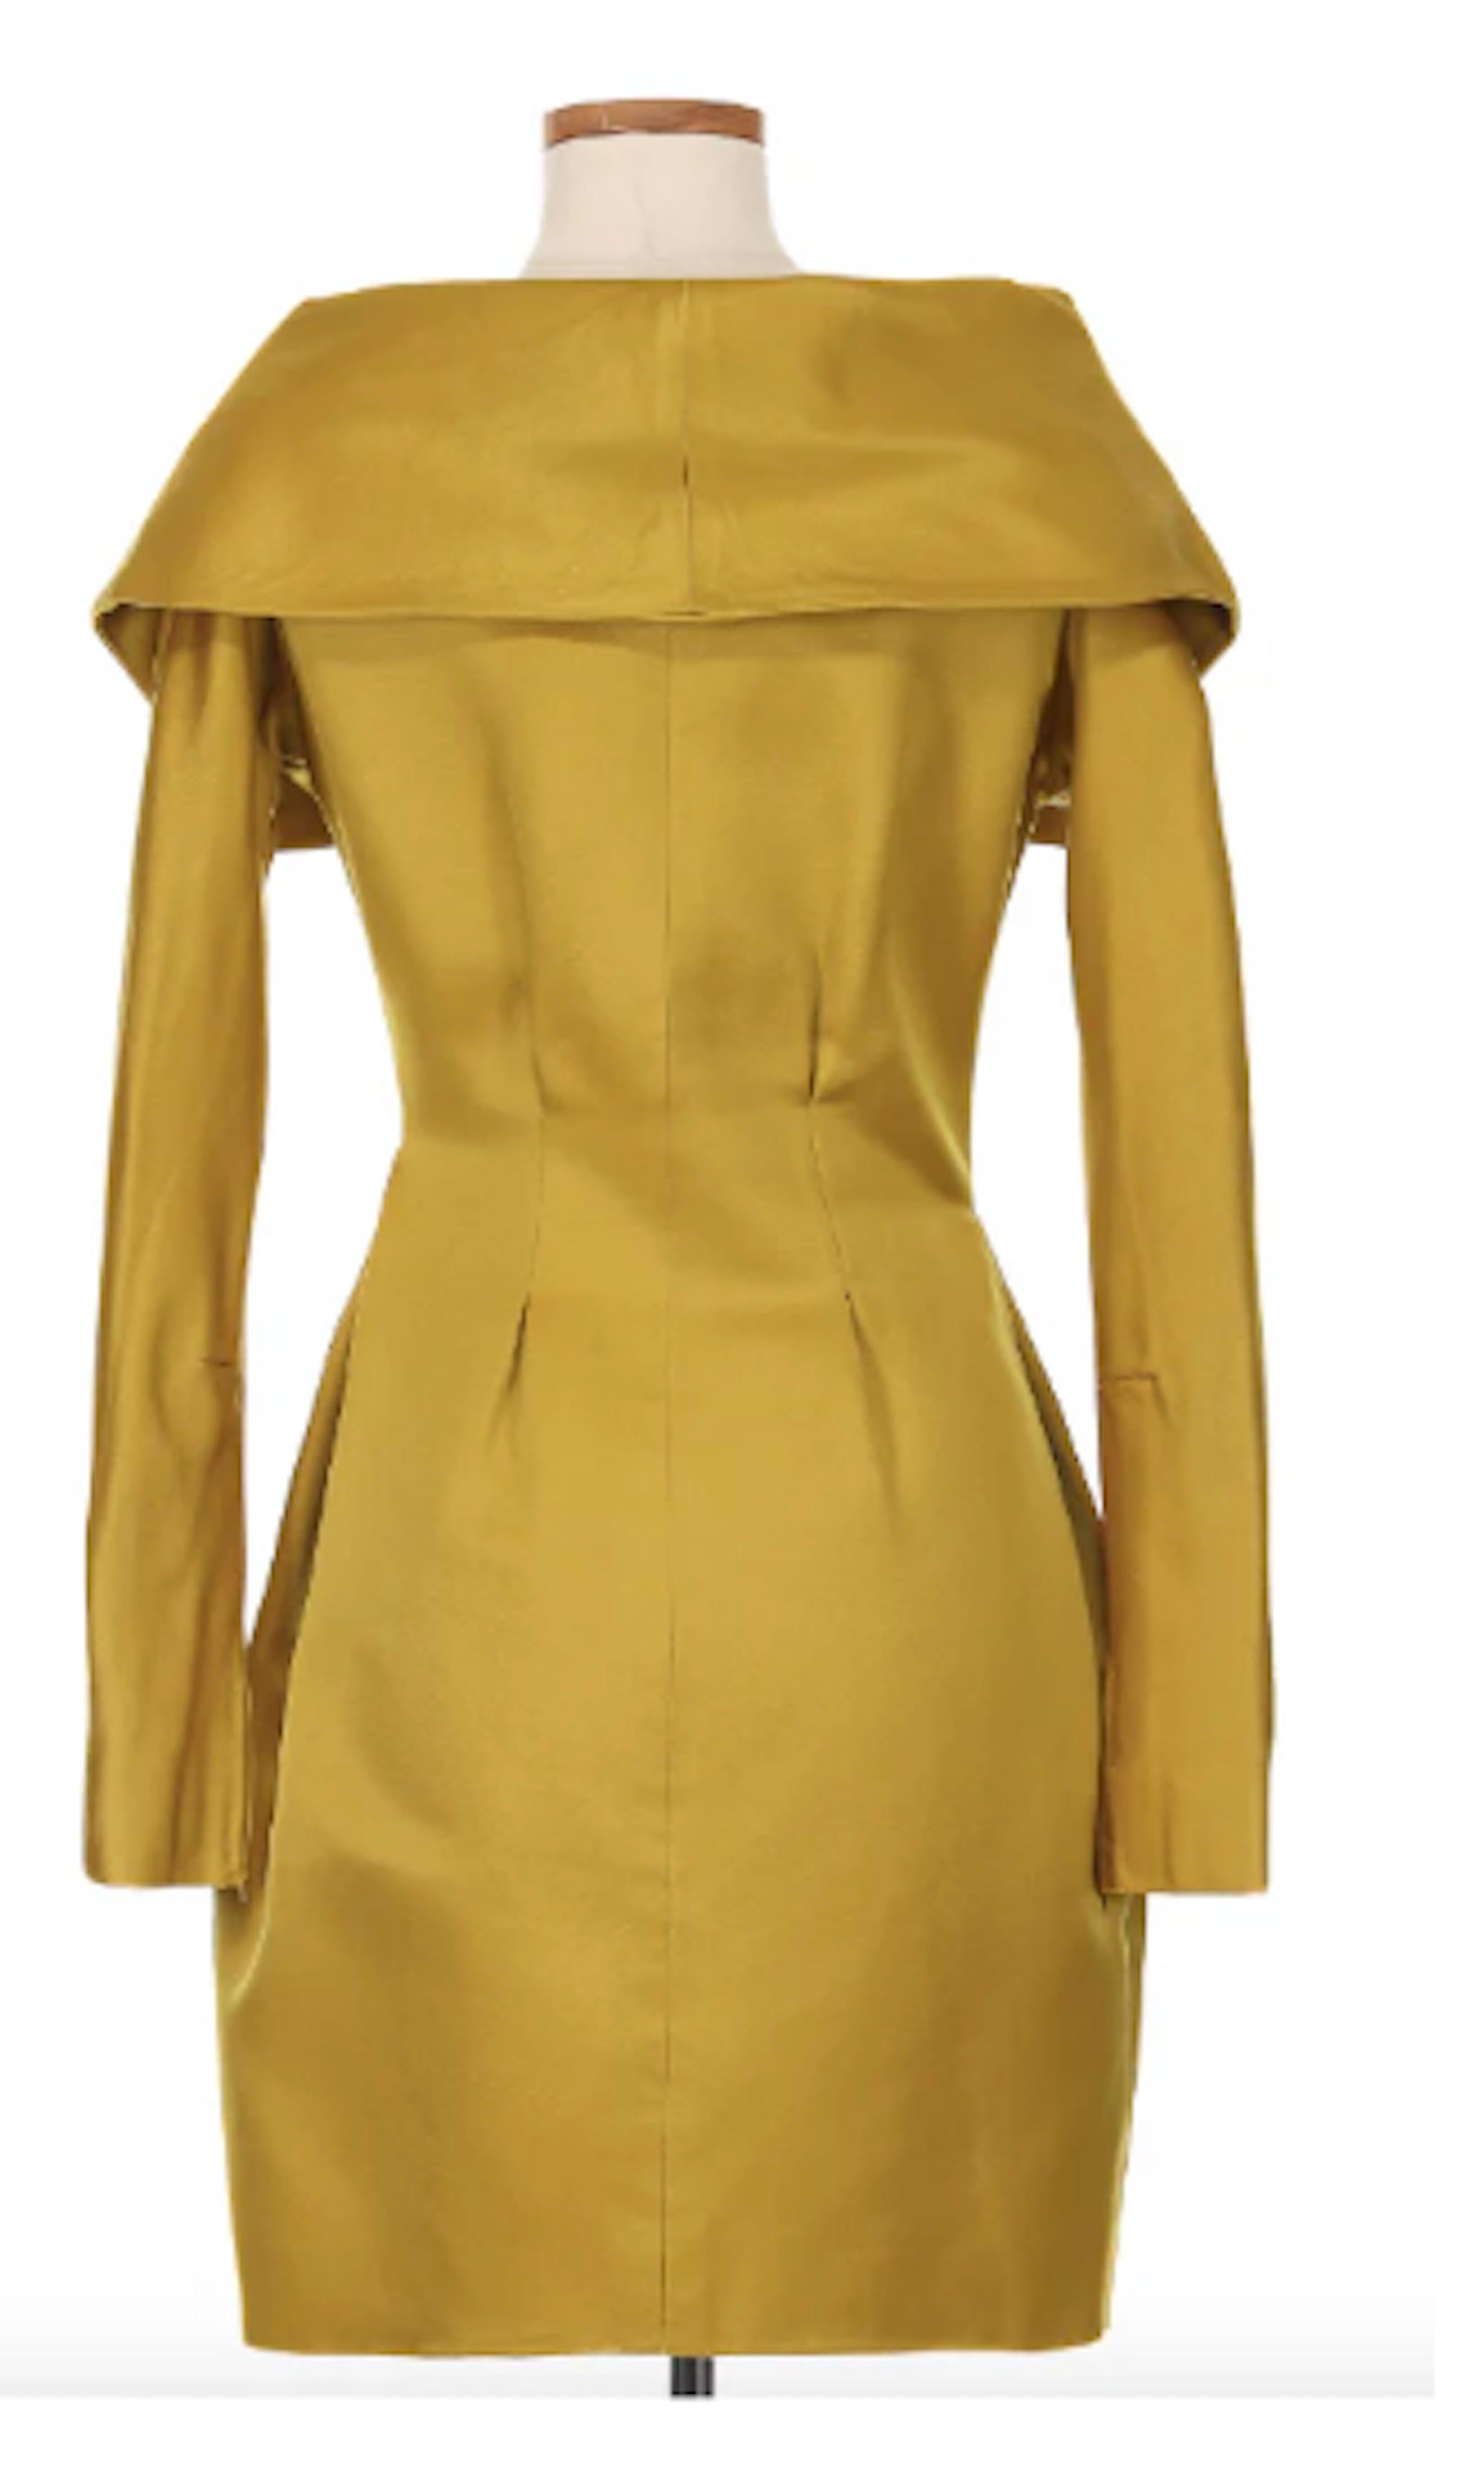 Christian Lacroix Couture Yellow Off the Shoulder Dress. This couture creation is crafted from a luxurious yellow silk that radiates vibrancy and elegance. From the waistline, the dress flares out gently, allowing for ease of movement, while